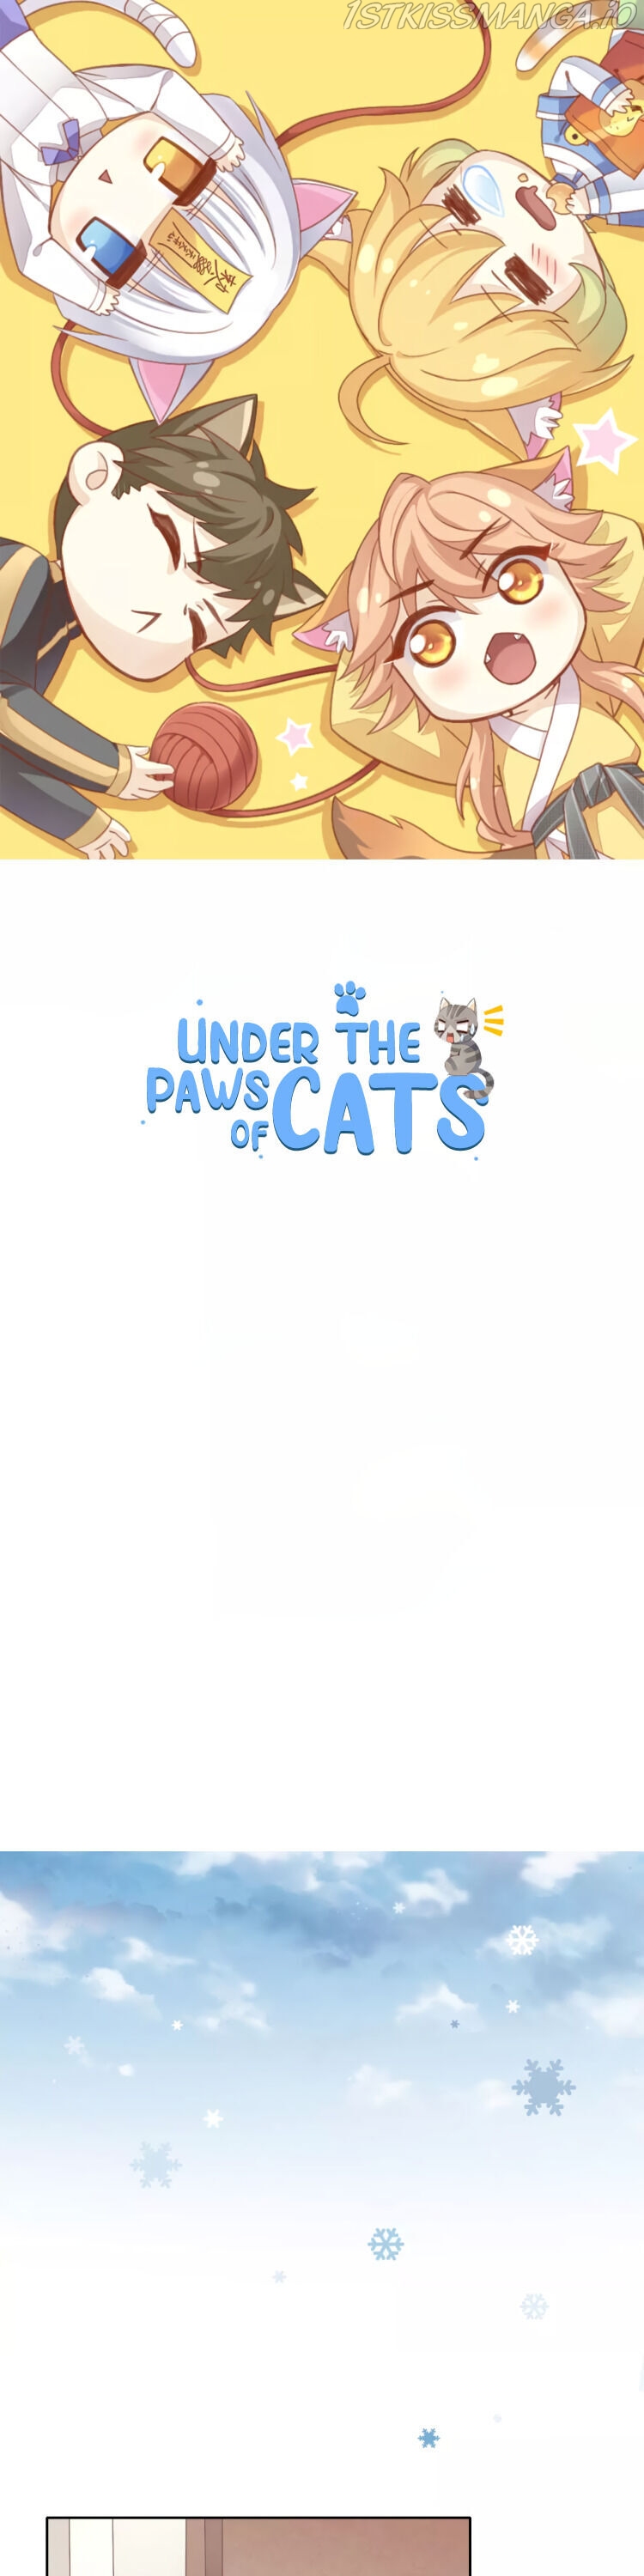 Under The Paws of Cats Chapter 34 - Page 1